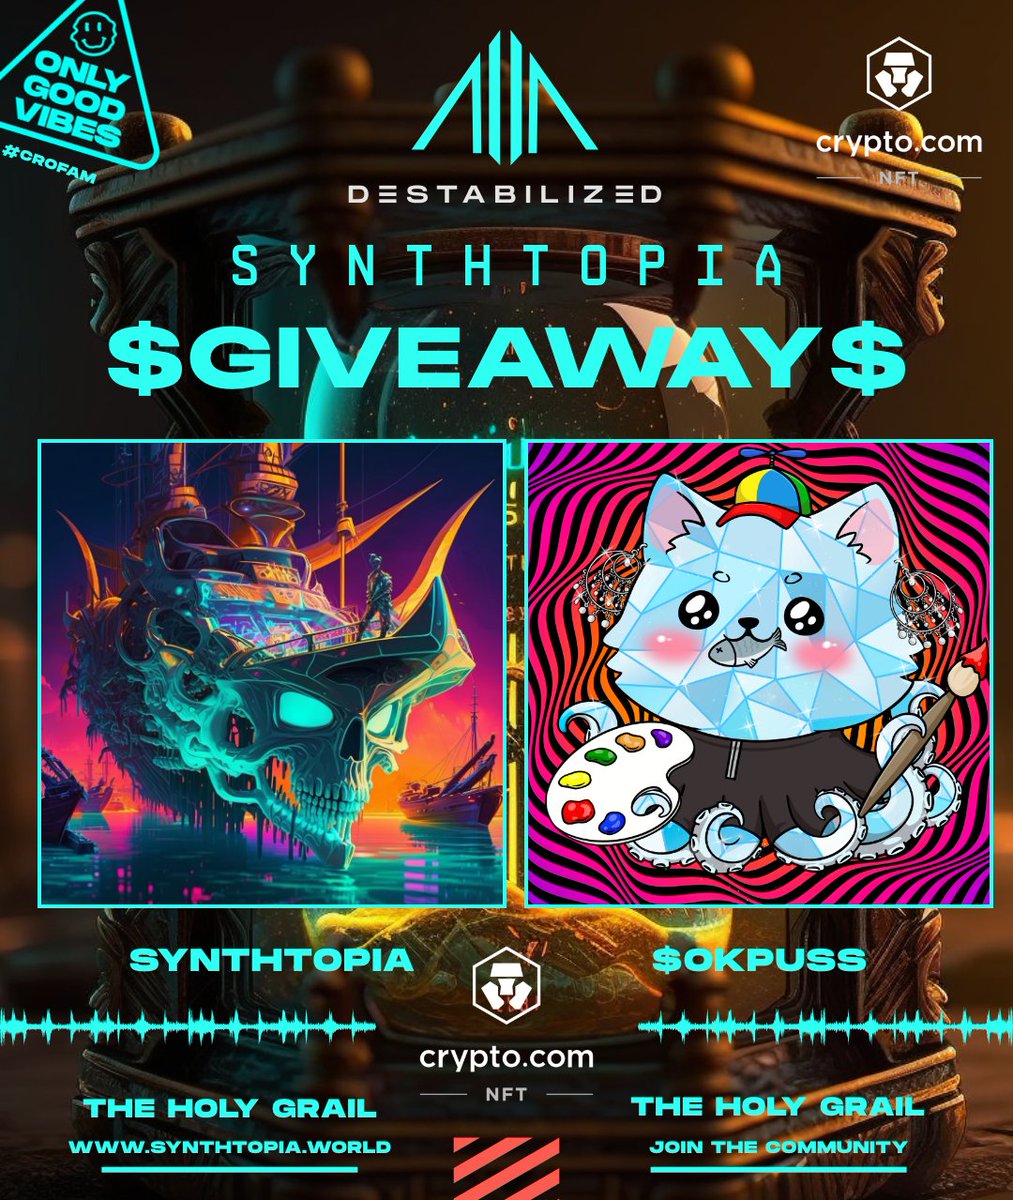 ⚡️ SYNTHTOPIA x 🐙 OKPUSS #GIVEAWAY 🎉 🏆 1x CUSTOM SYNTHTOPIA NFT {OMEGA} 🏆 1x SYNTHTOPIA 1/1 LEGENDARY NFT 🏆 15x OKPUSS NFTs + $OKPUSS $AIRDROP We're partnering with @octopuss_meme to bring you the 8,888 PFP collection in Q2 @cryptocomnft. All holders will receive a 40%…